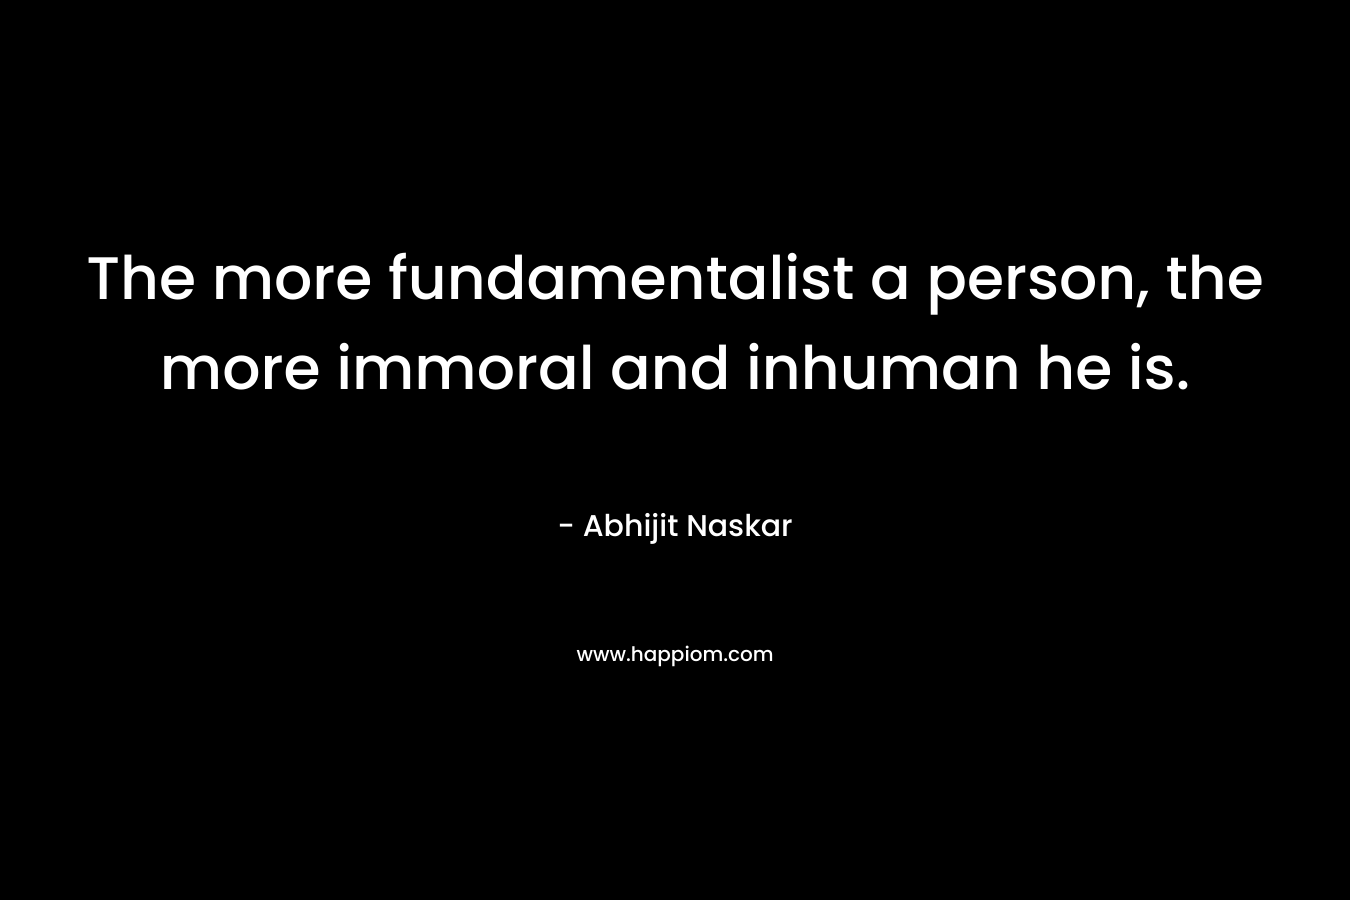 The more fundamentalist a person, the more immoral and inhuman he is. – Abhijit Naskar